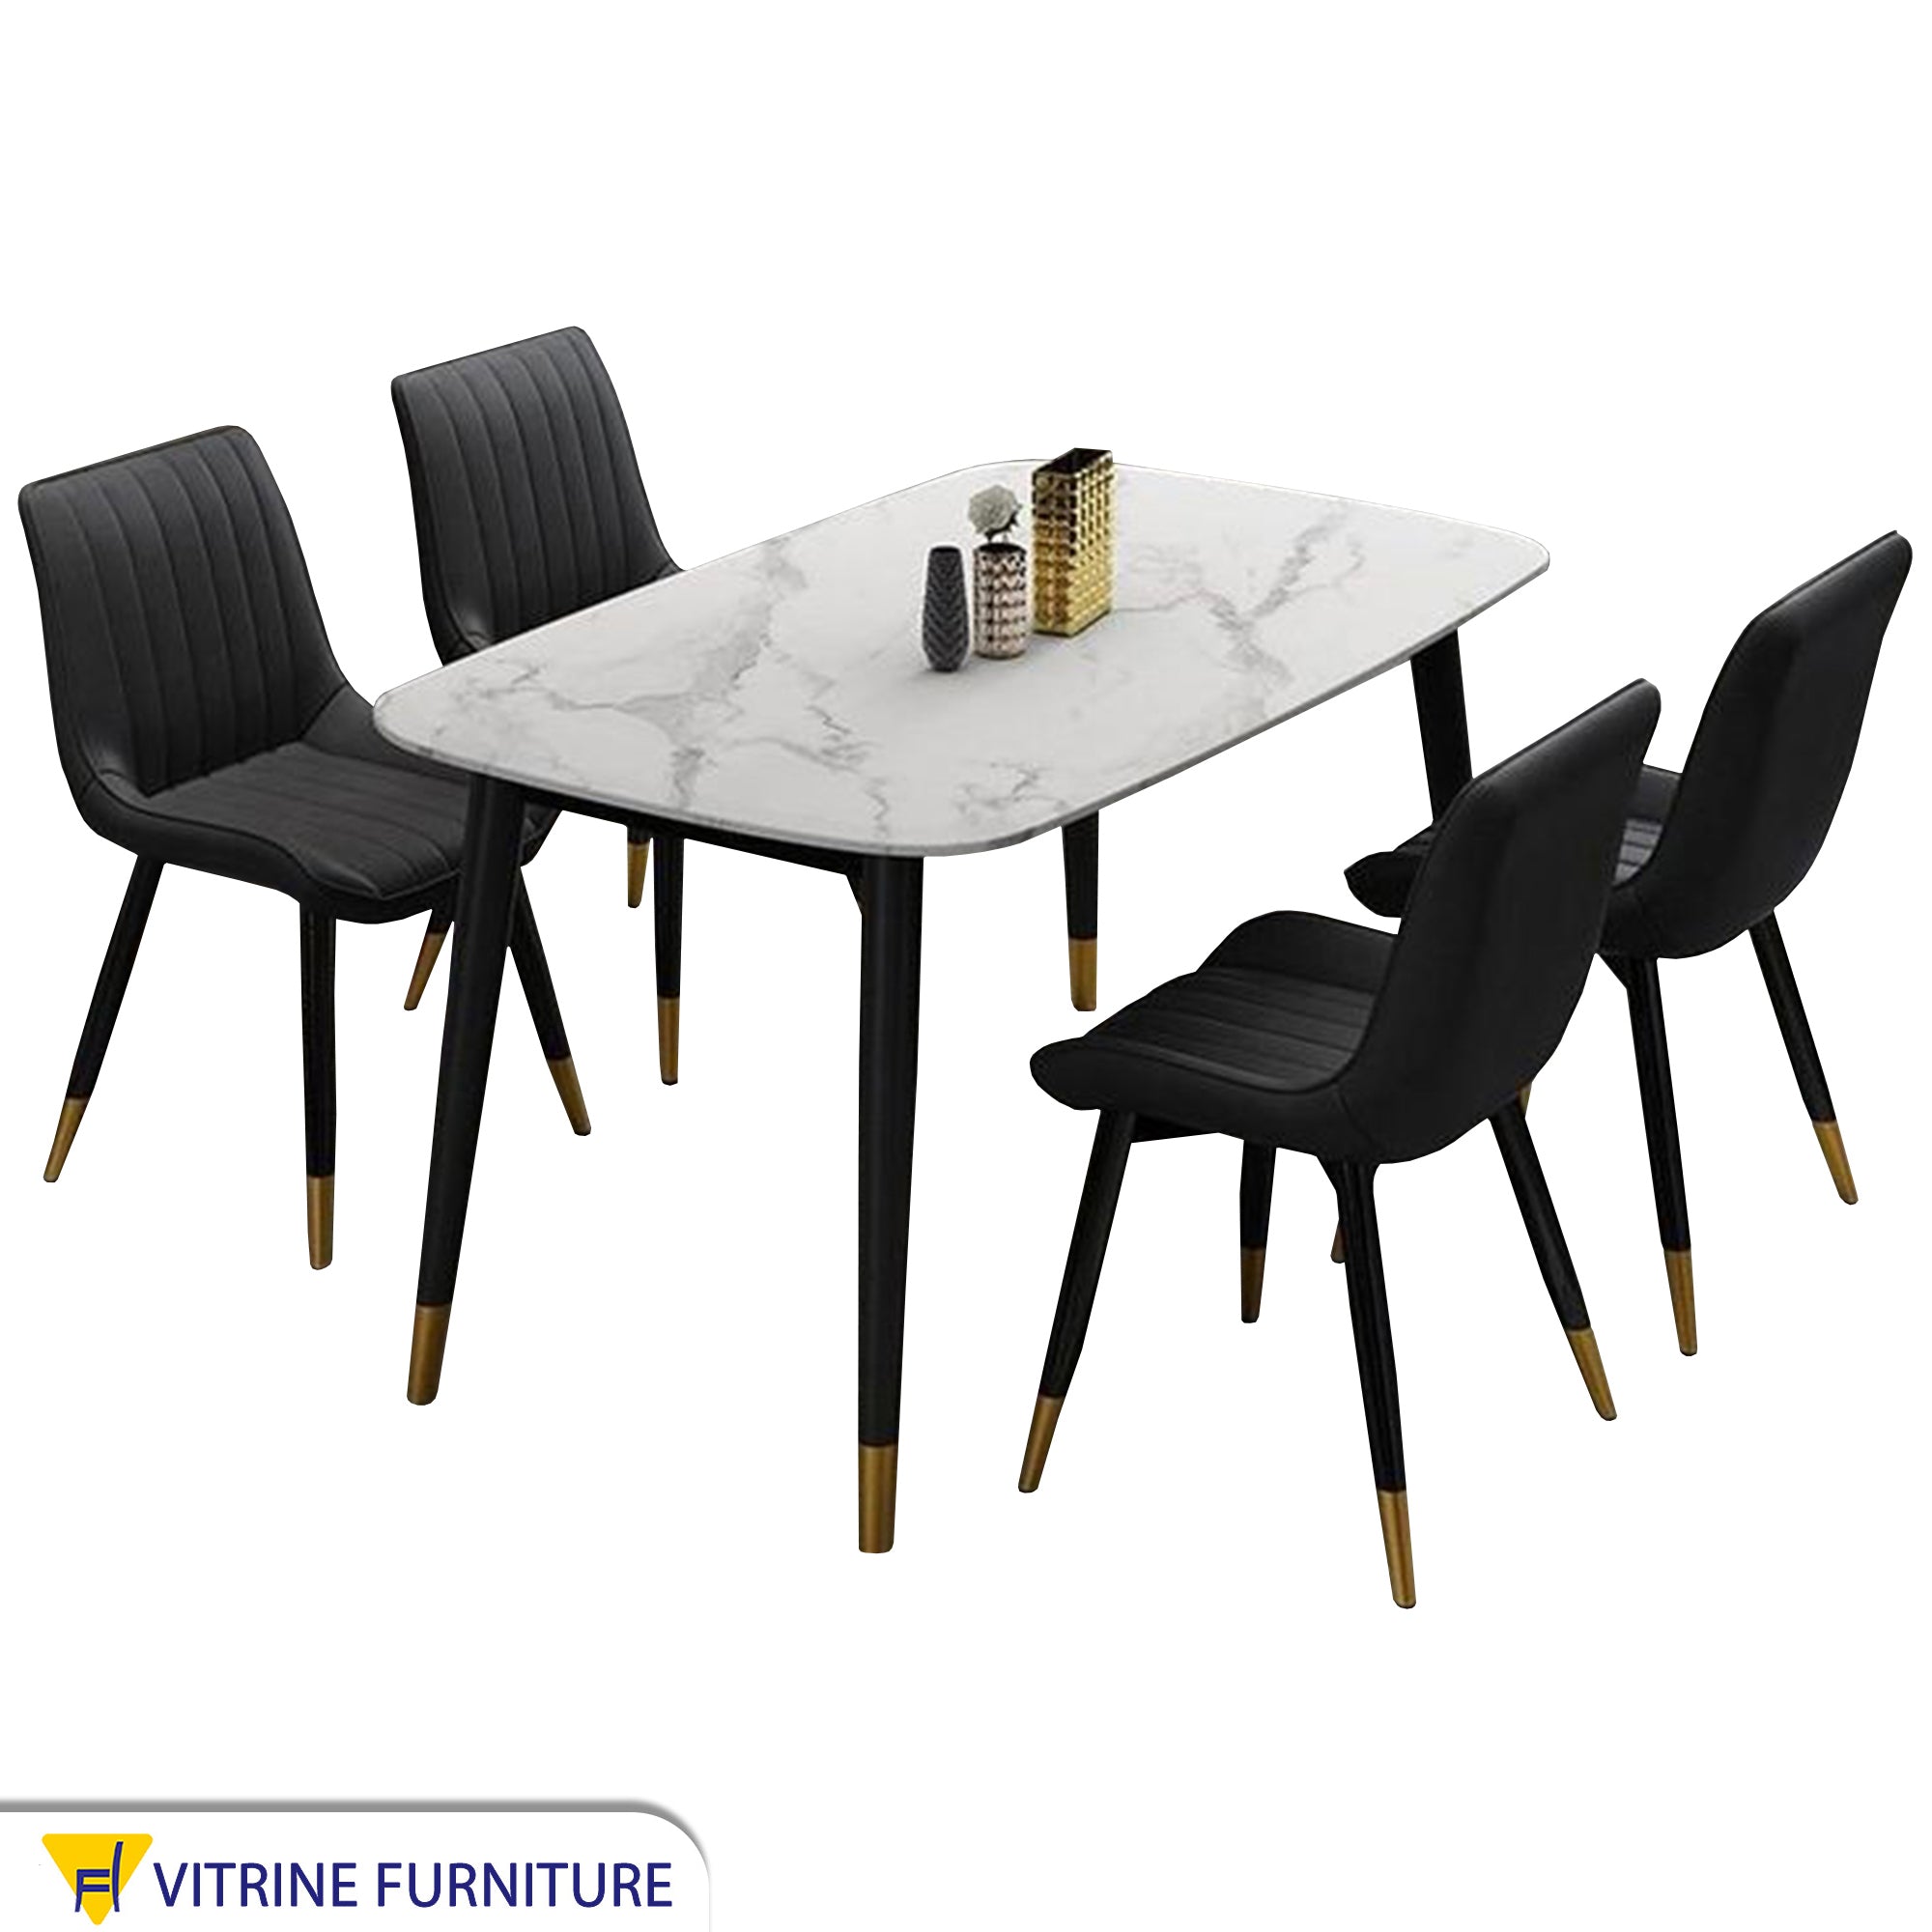 Dining table for limited spaces